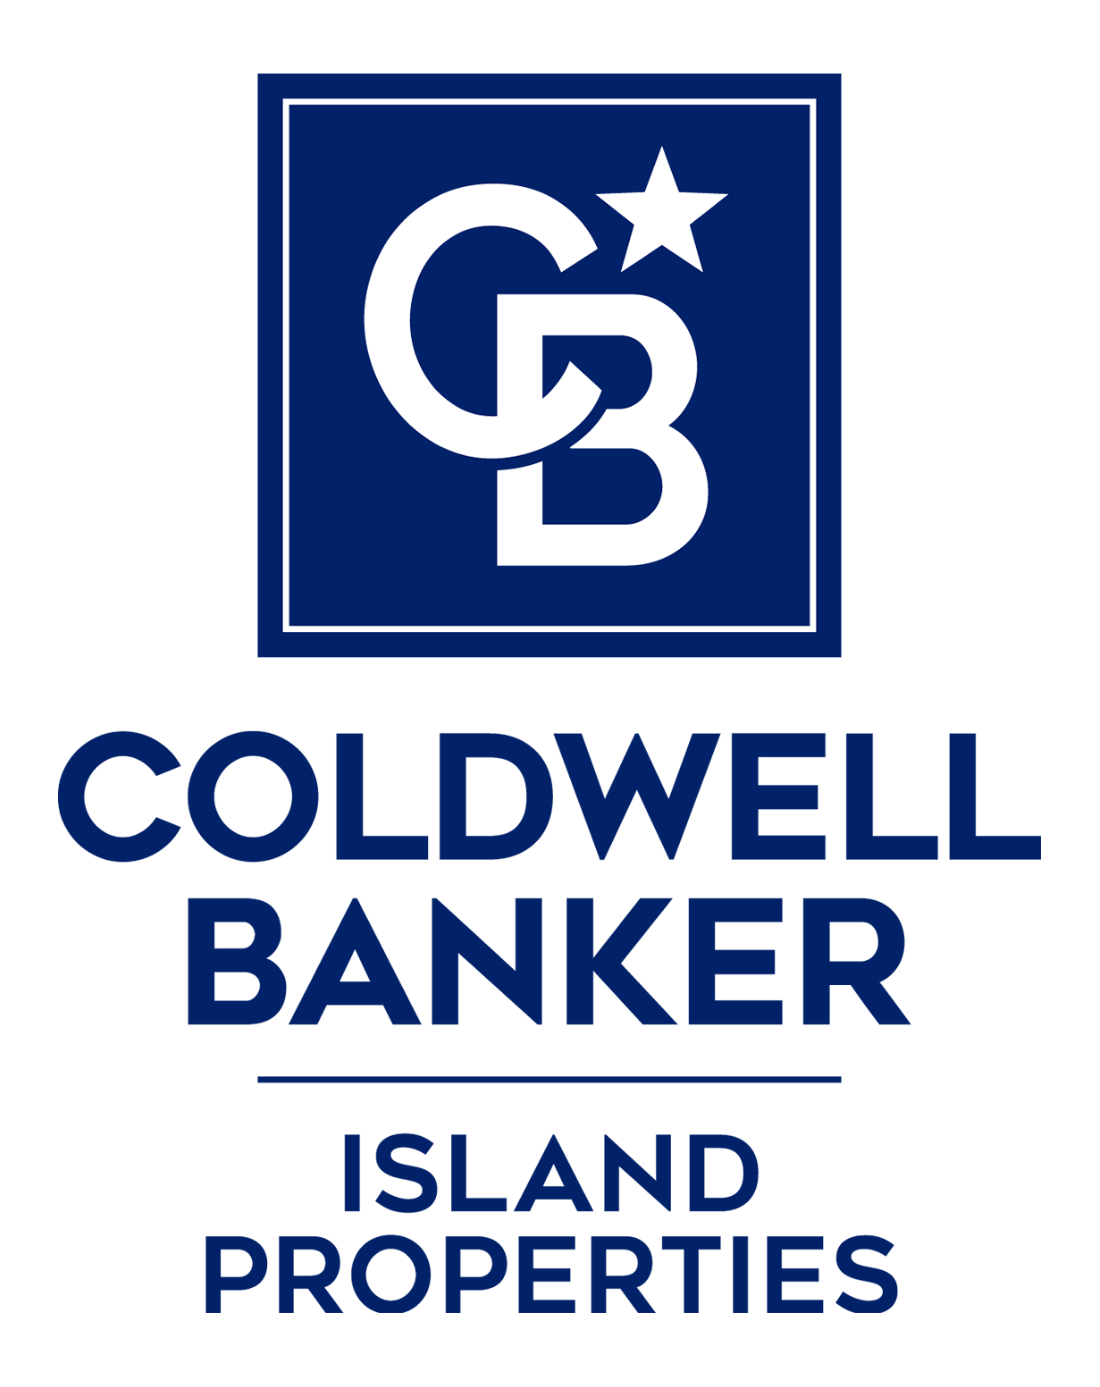 Christopher Worth - Coldwell Banker Island Properties Logo